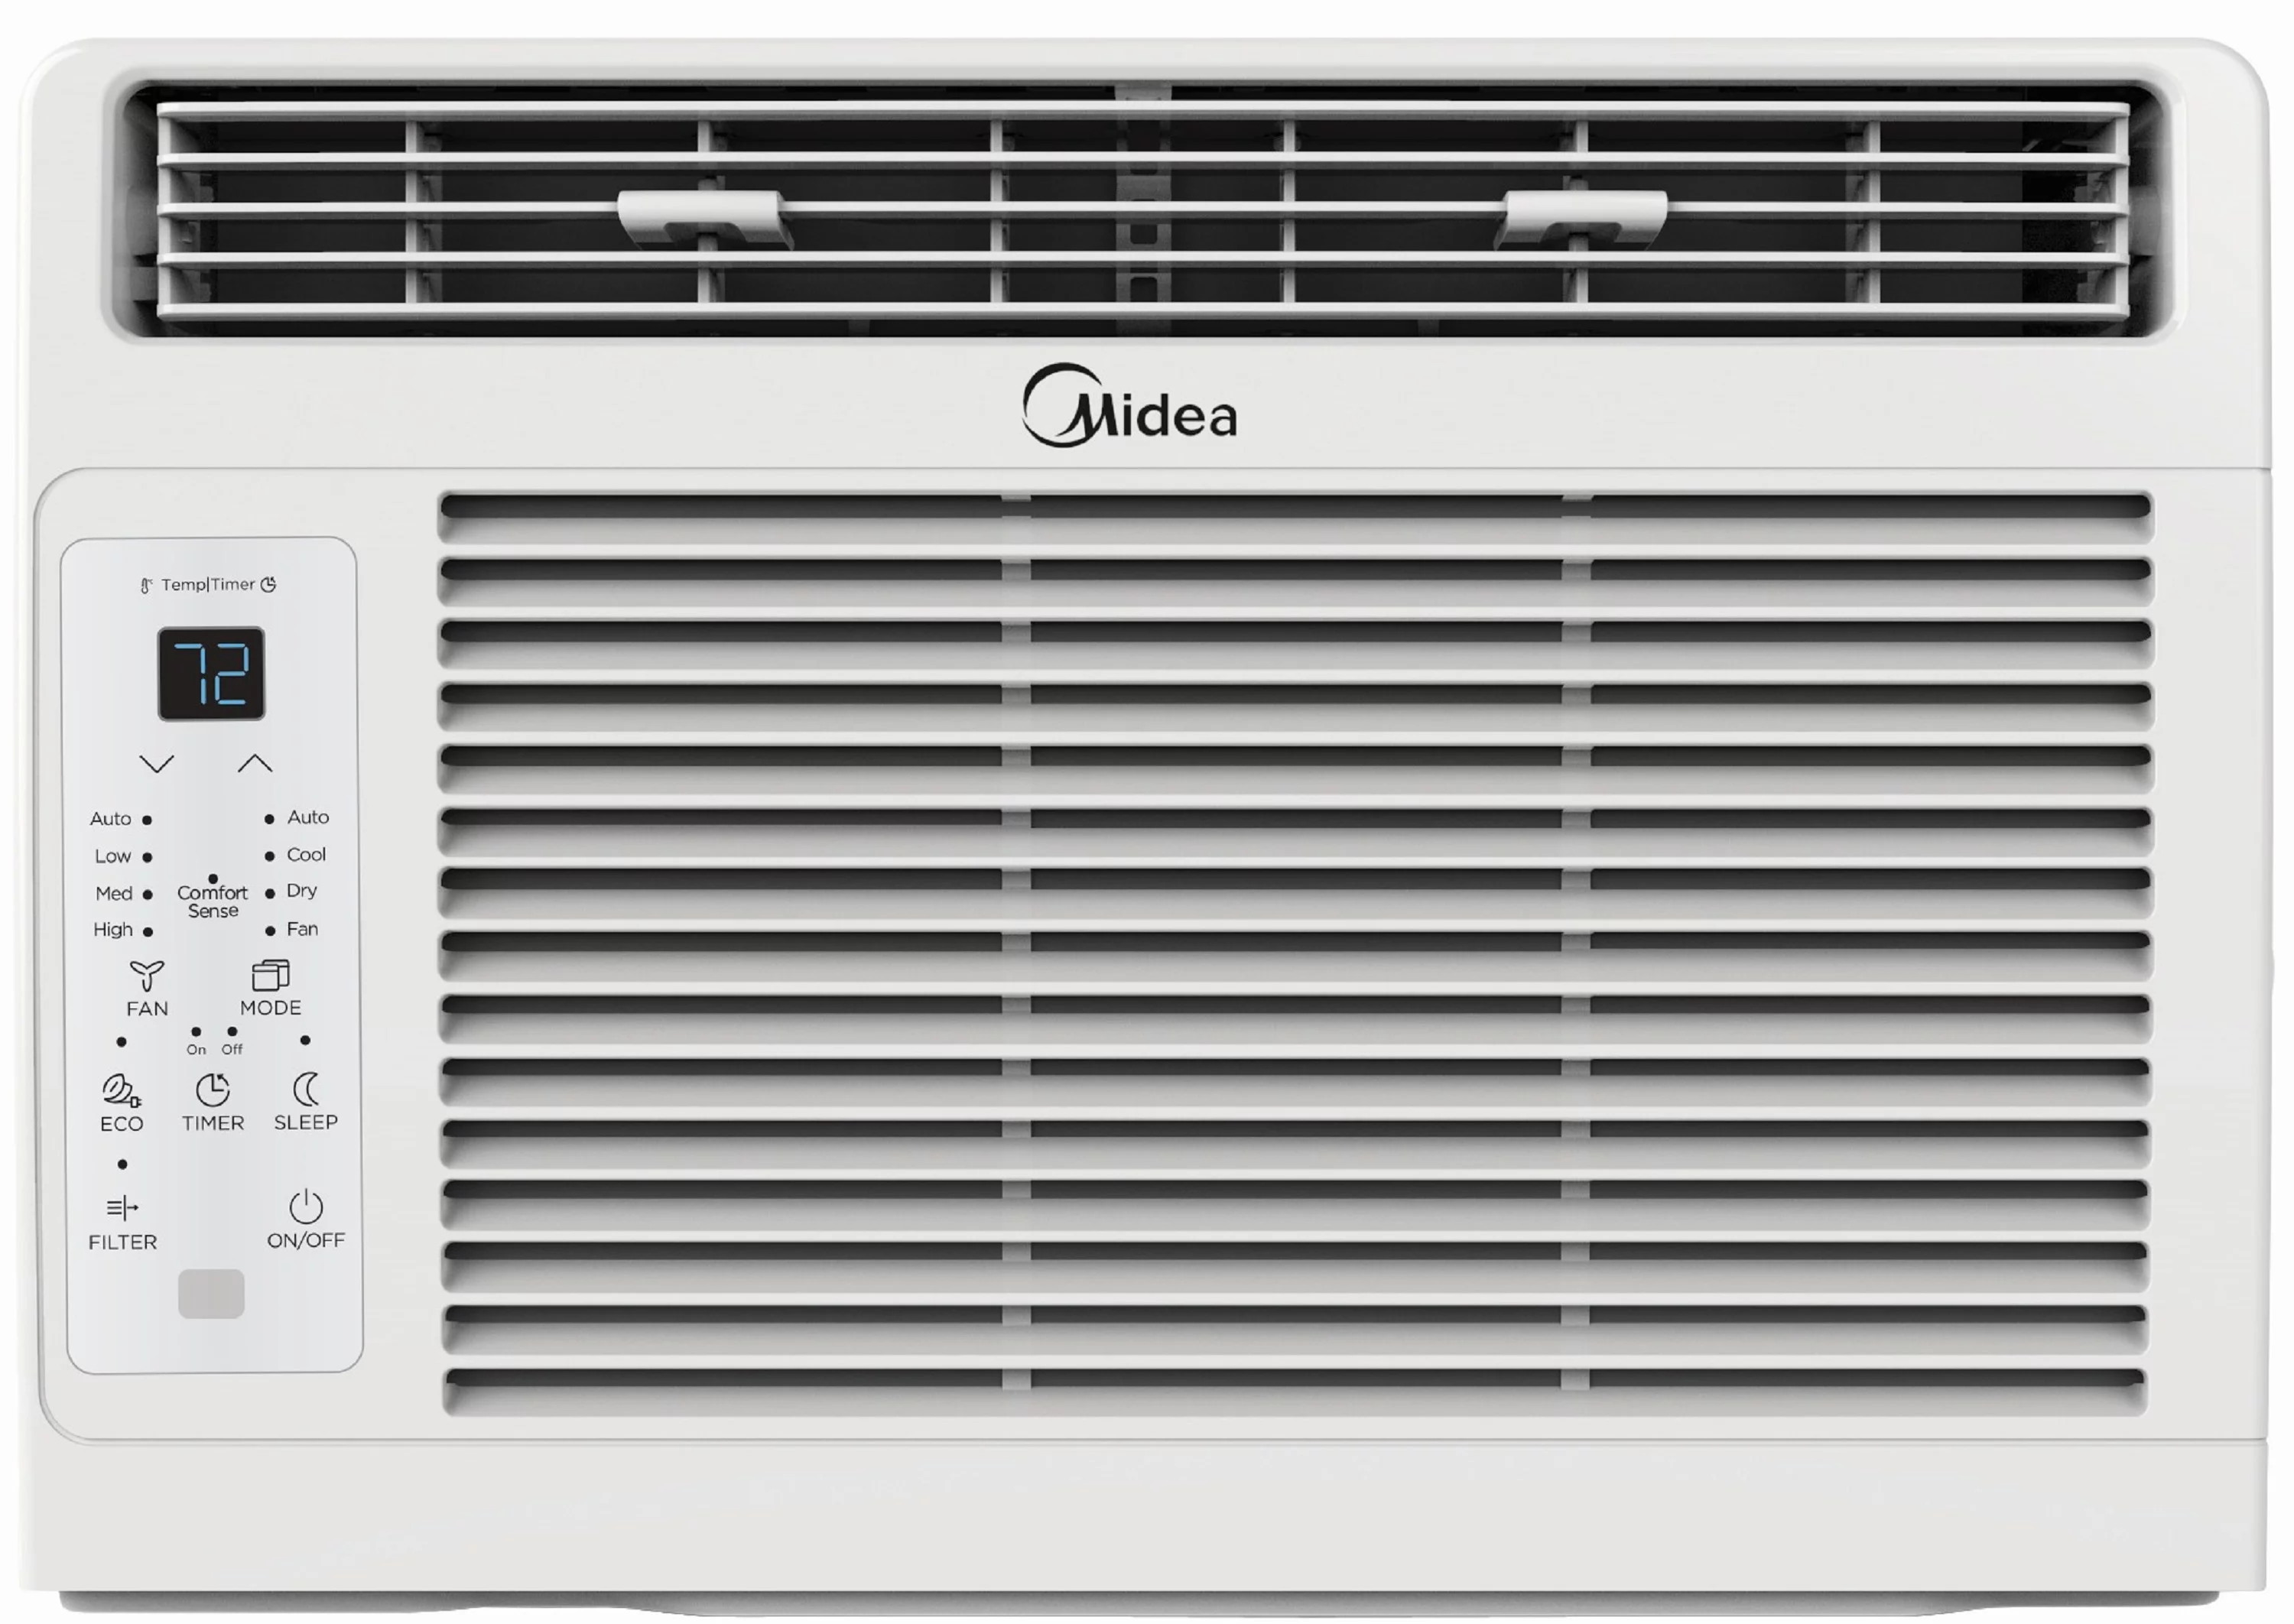 Midea 5,000 BTU 150 Sq ft Window Air Conditioner with Remote, White, MAW05R1WWT